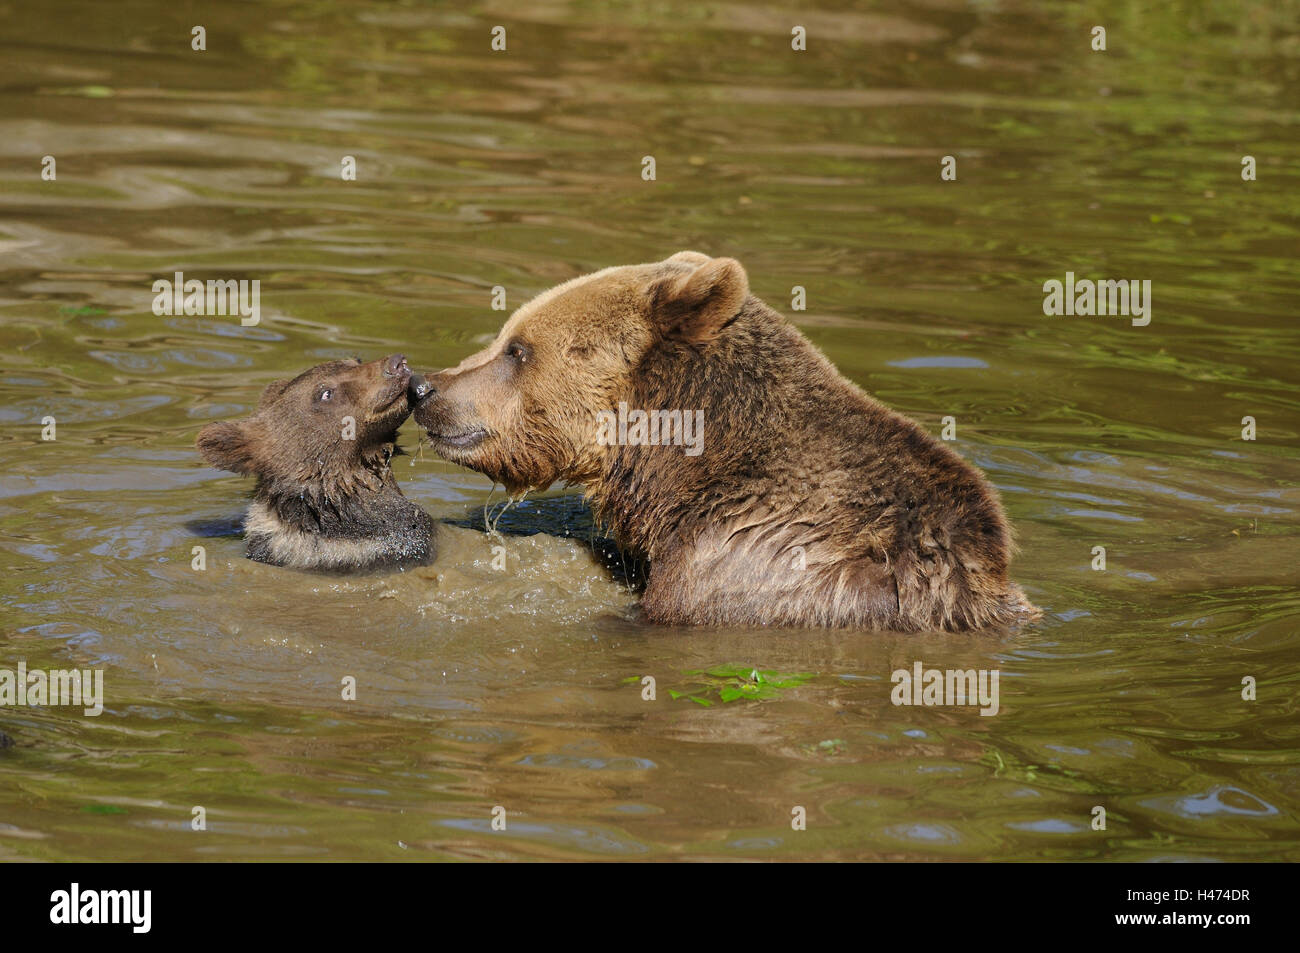 Brown bears, Ursus arctos, nut with young animal, water, side view, Stock Photo